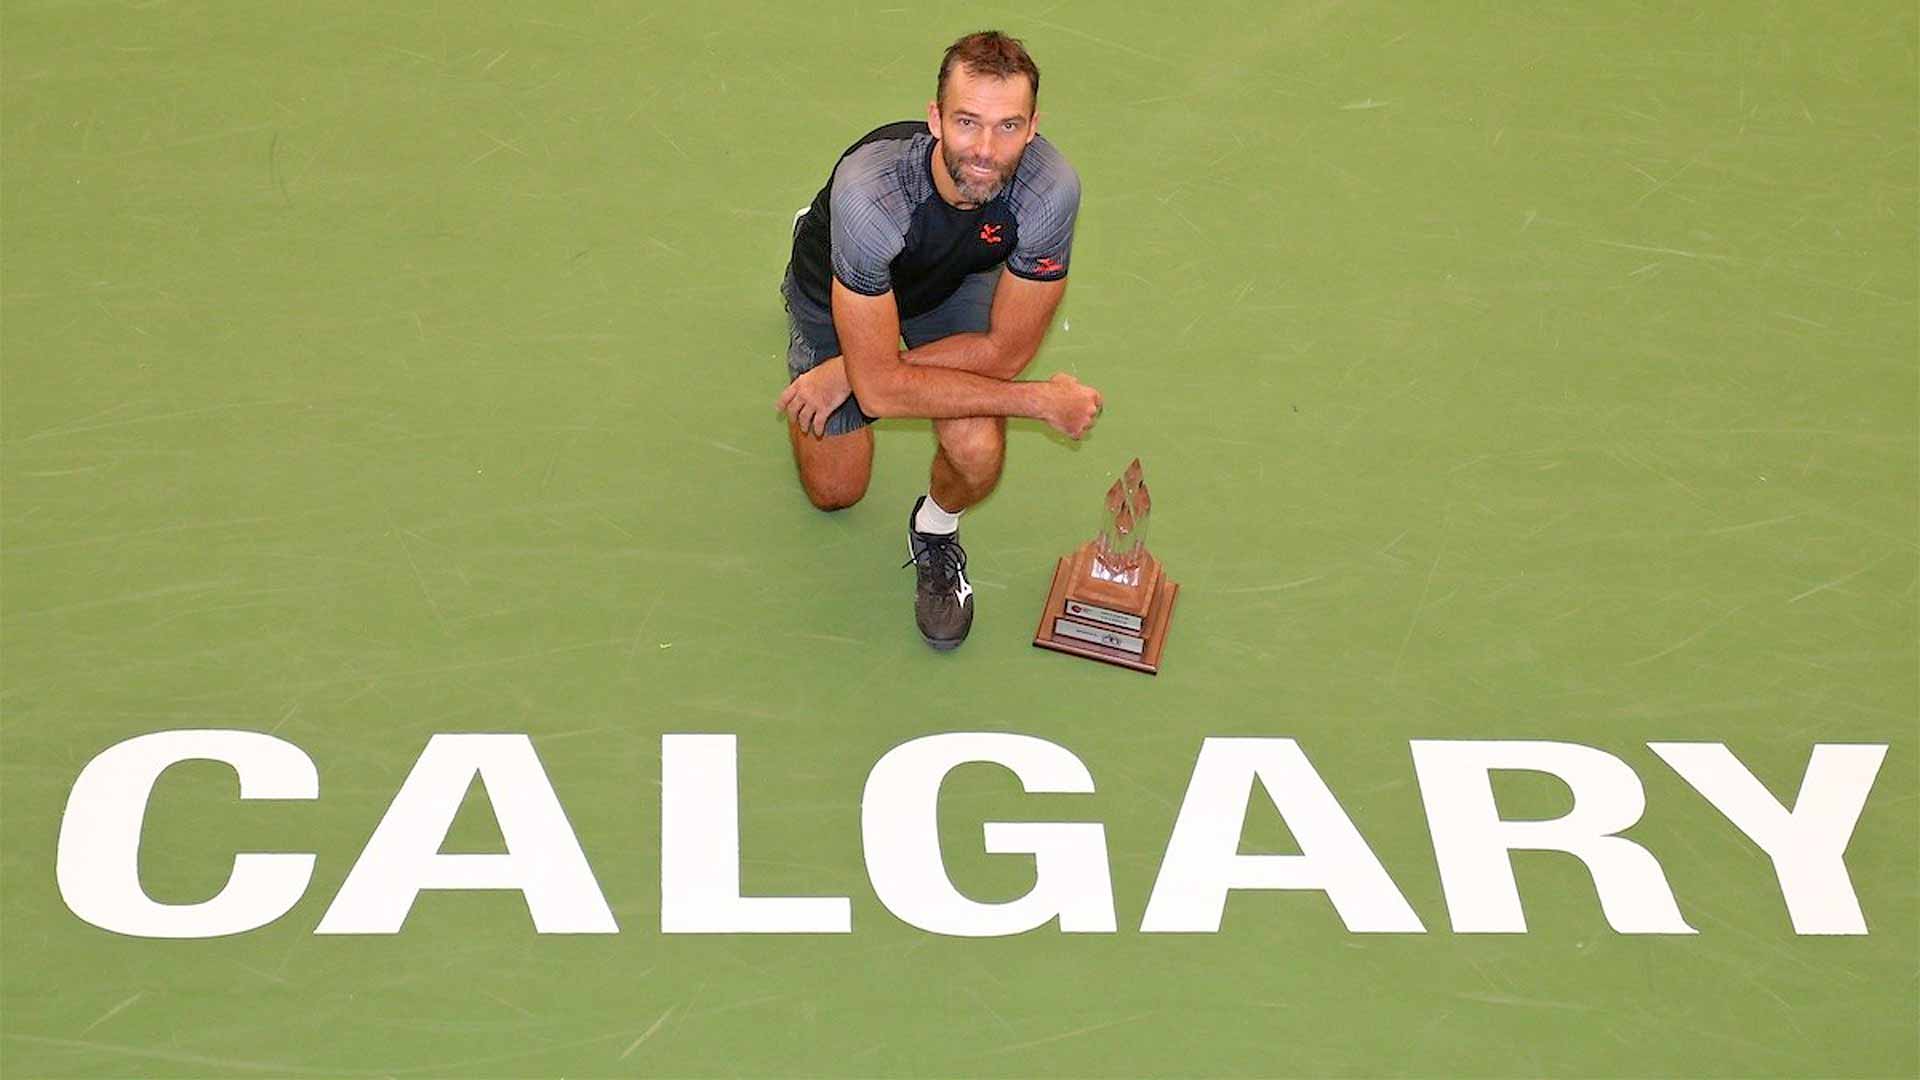 Ivo Karlovic wins a Challenger in Calgary in 2018